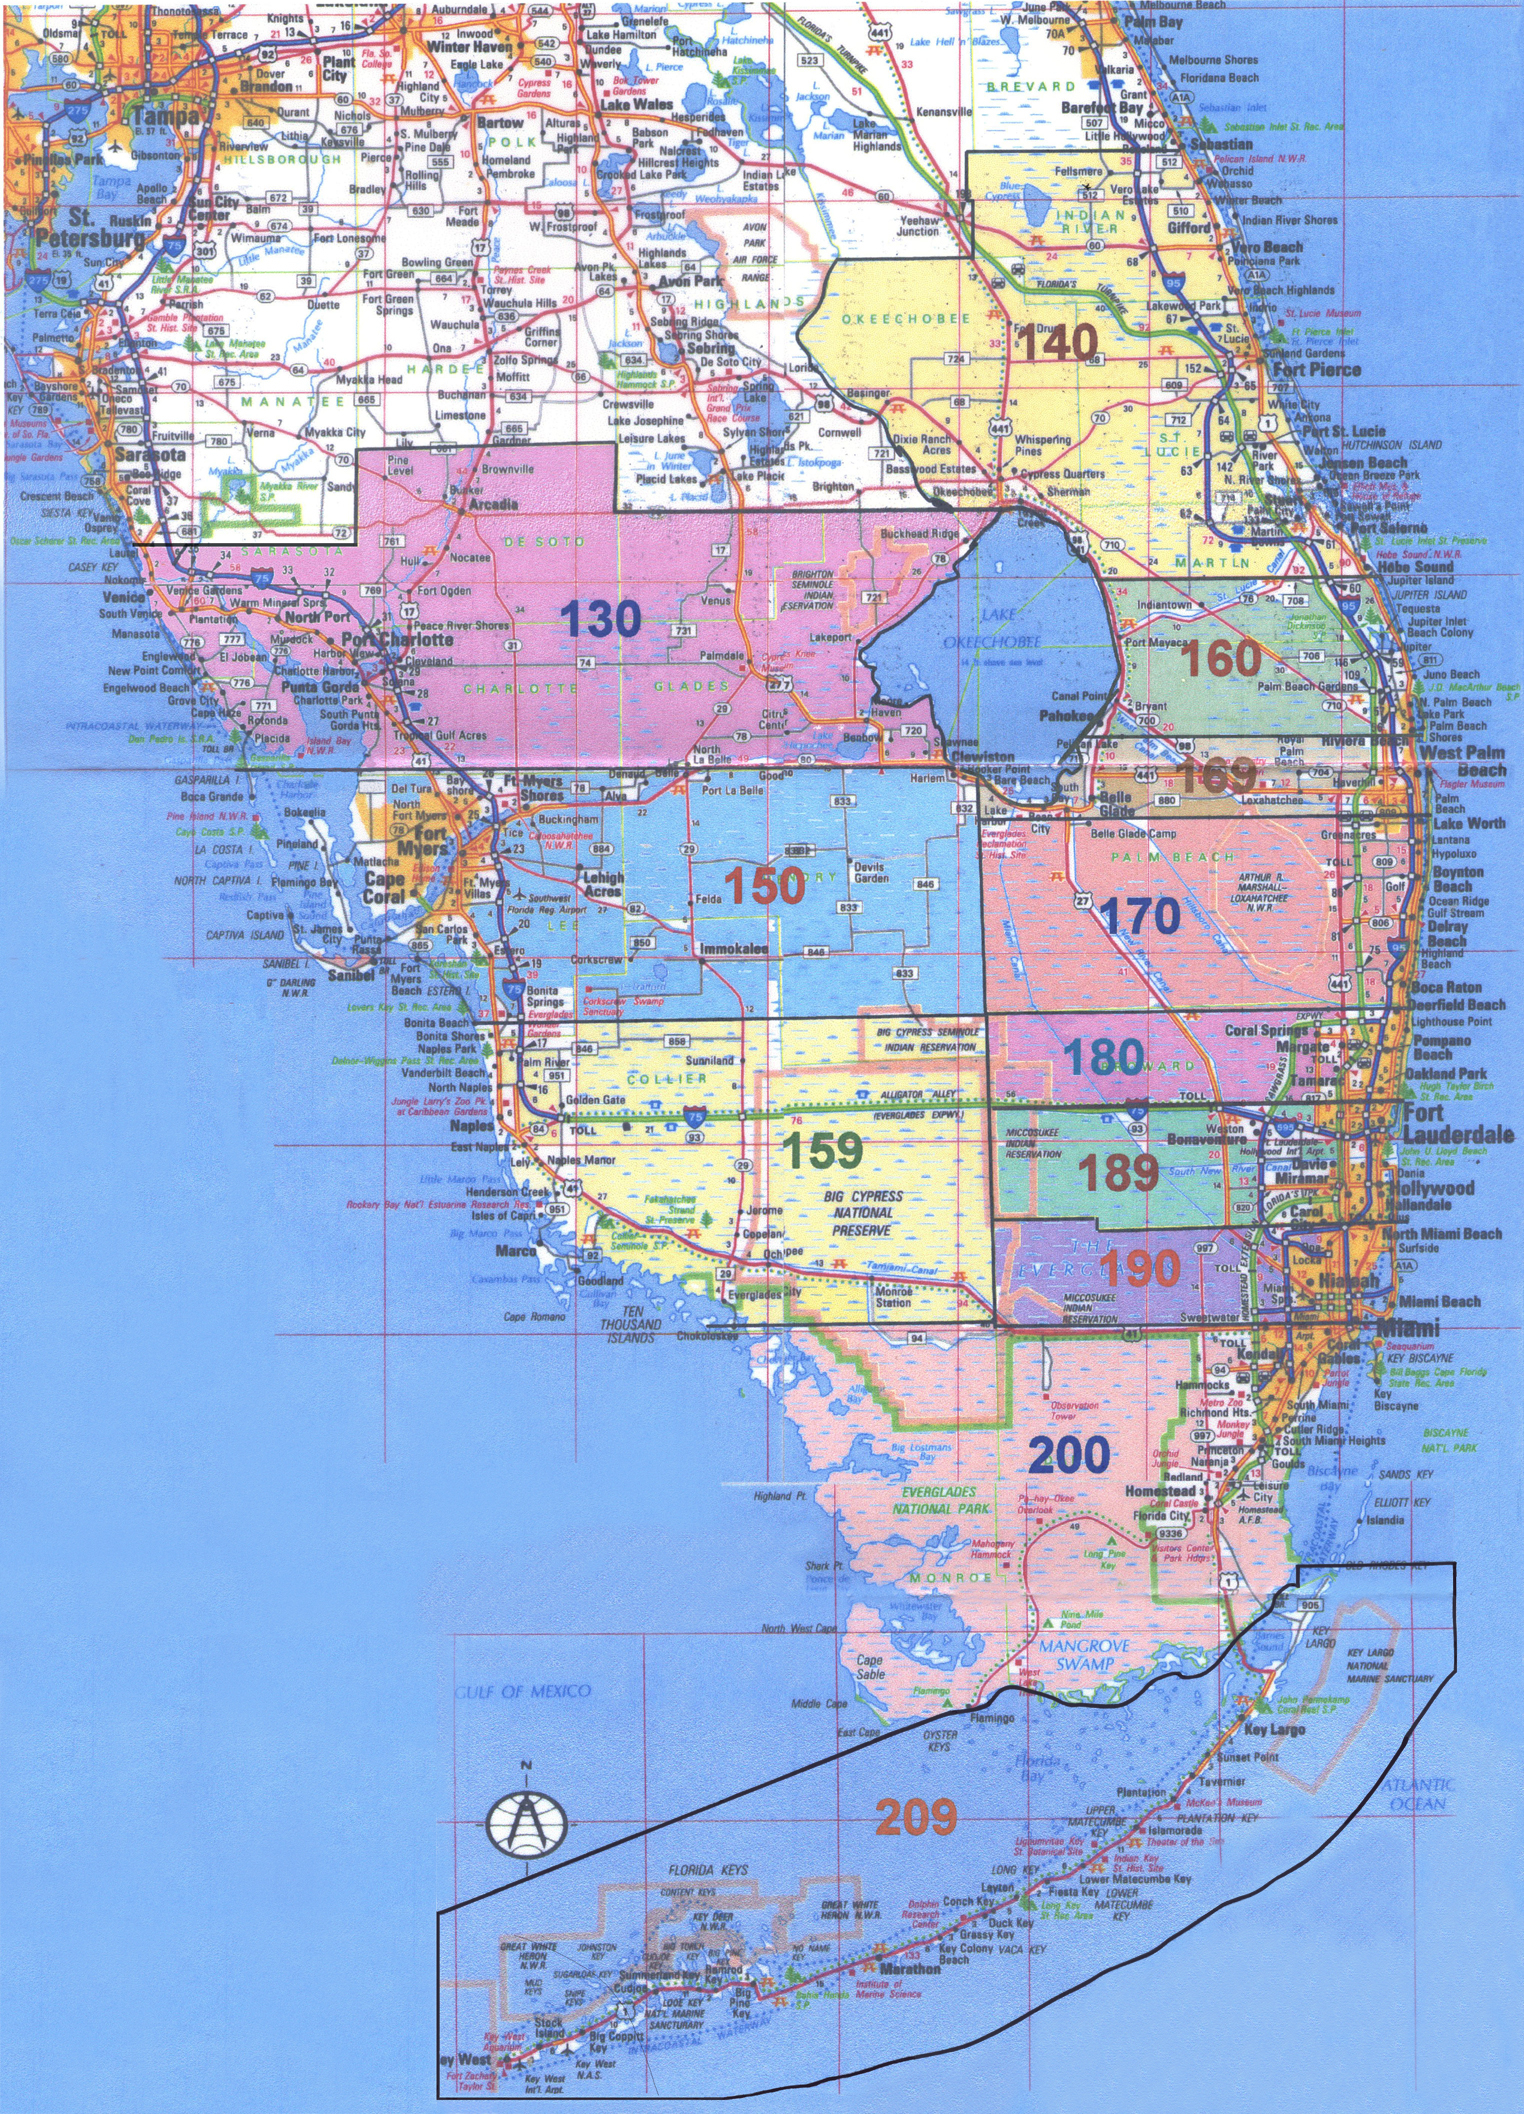 Florida South Area 10 Al Anon Map Of Districts